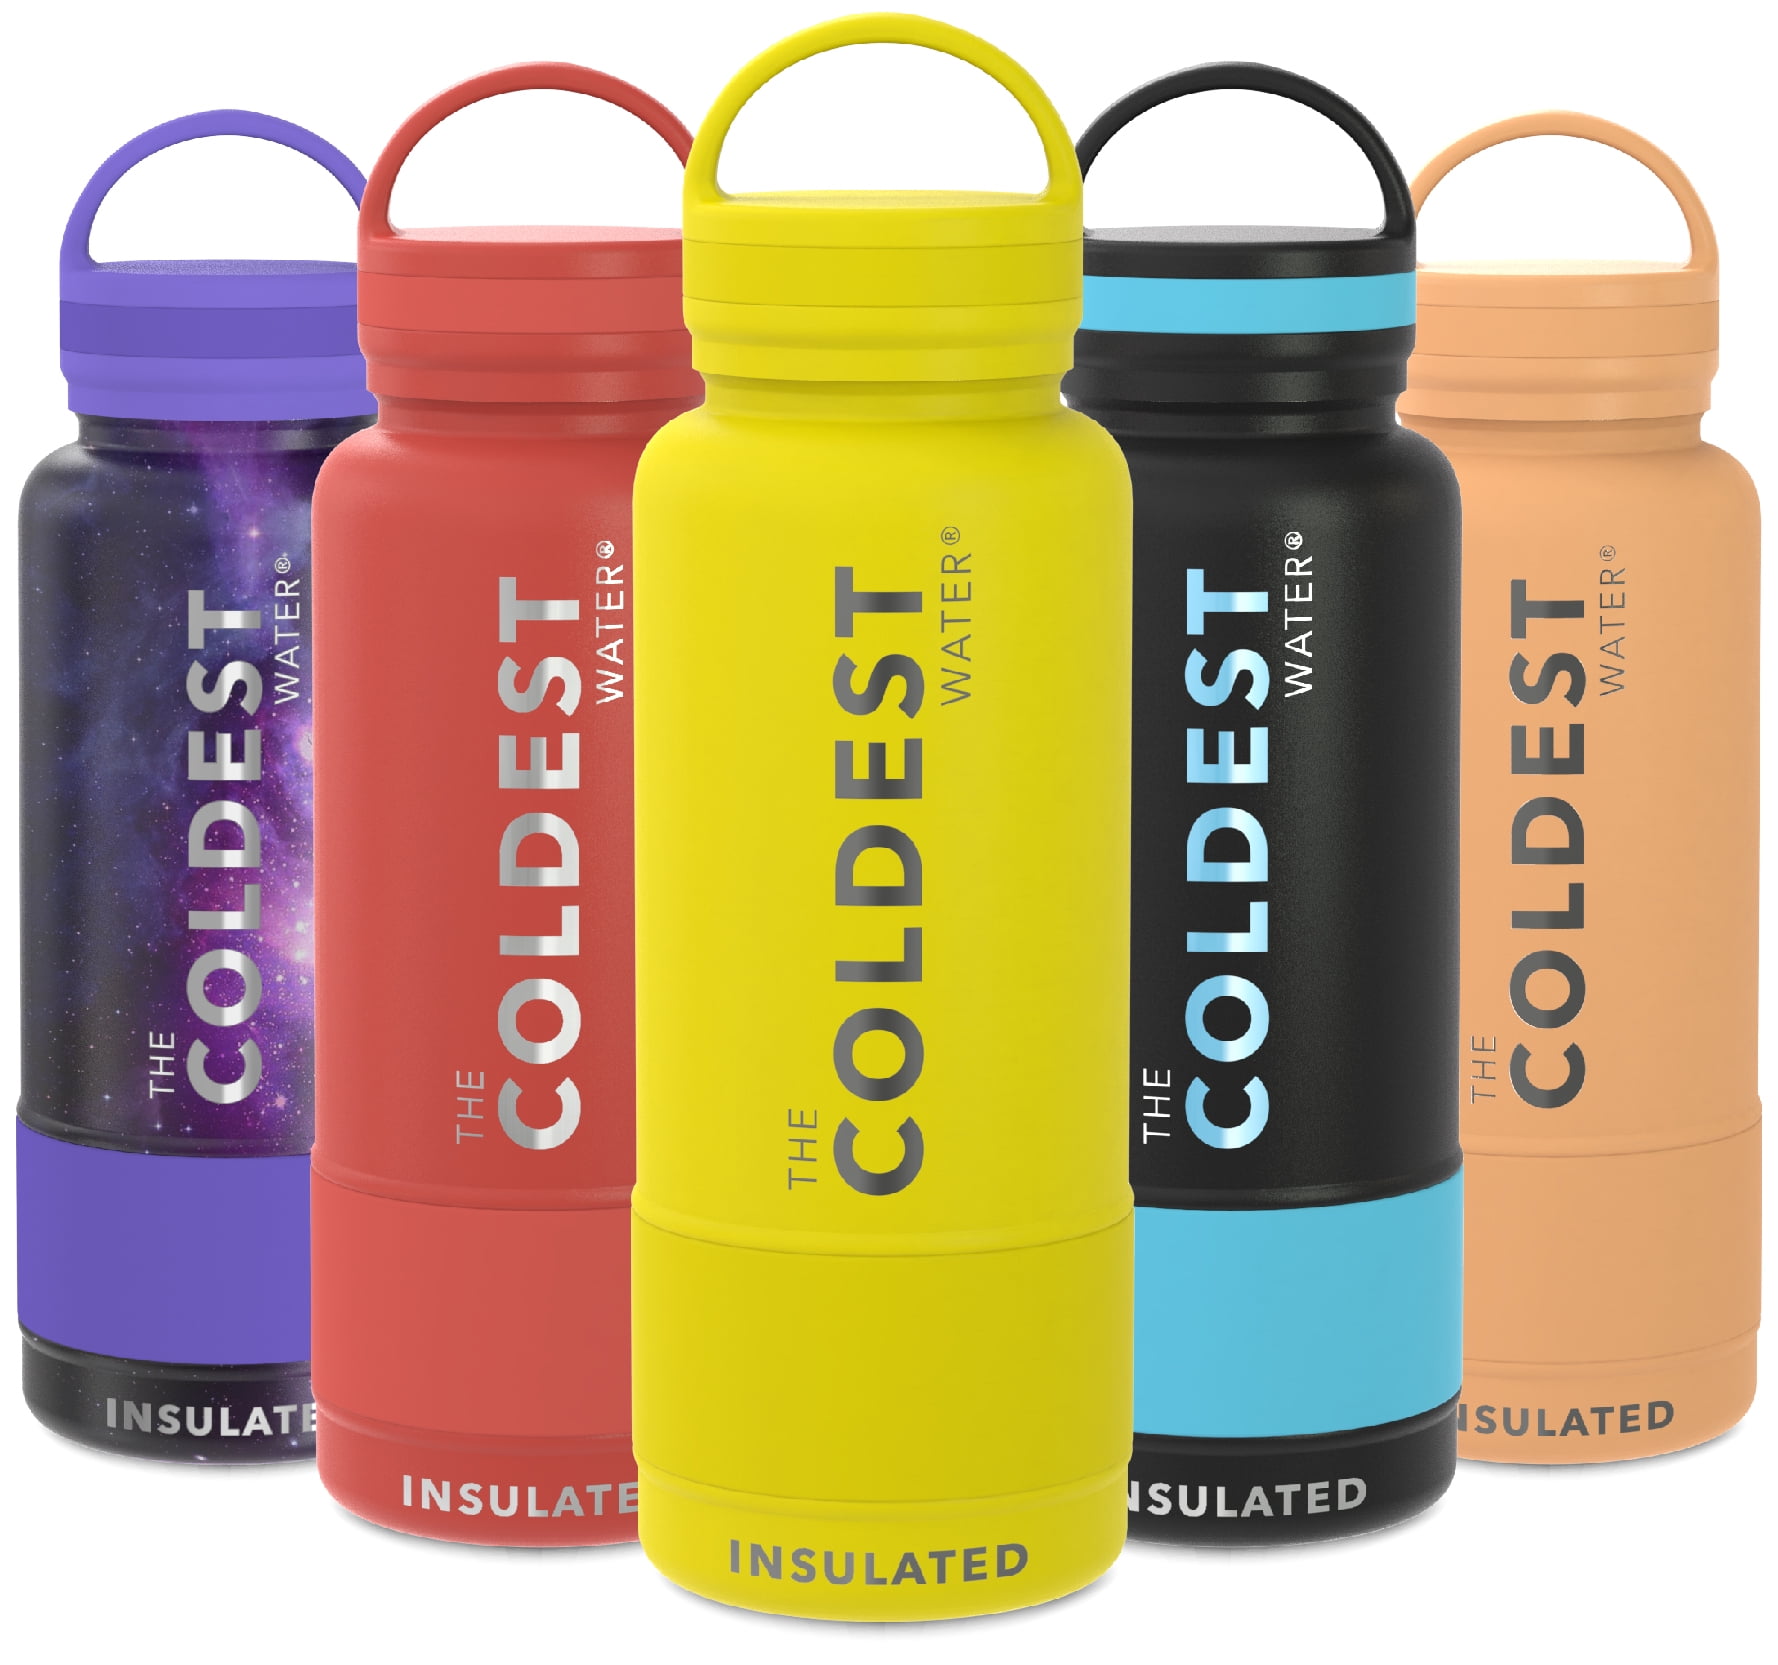 Coldest Water 1-Gallon Insulated Bottle keeps drinks cold for 36+ hours